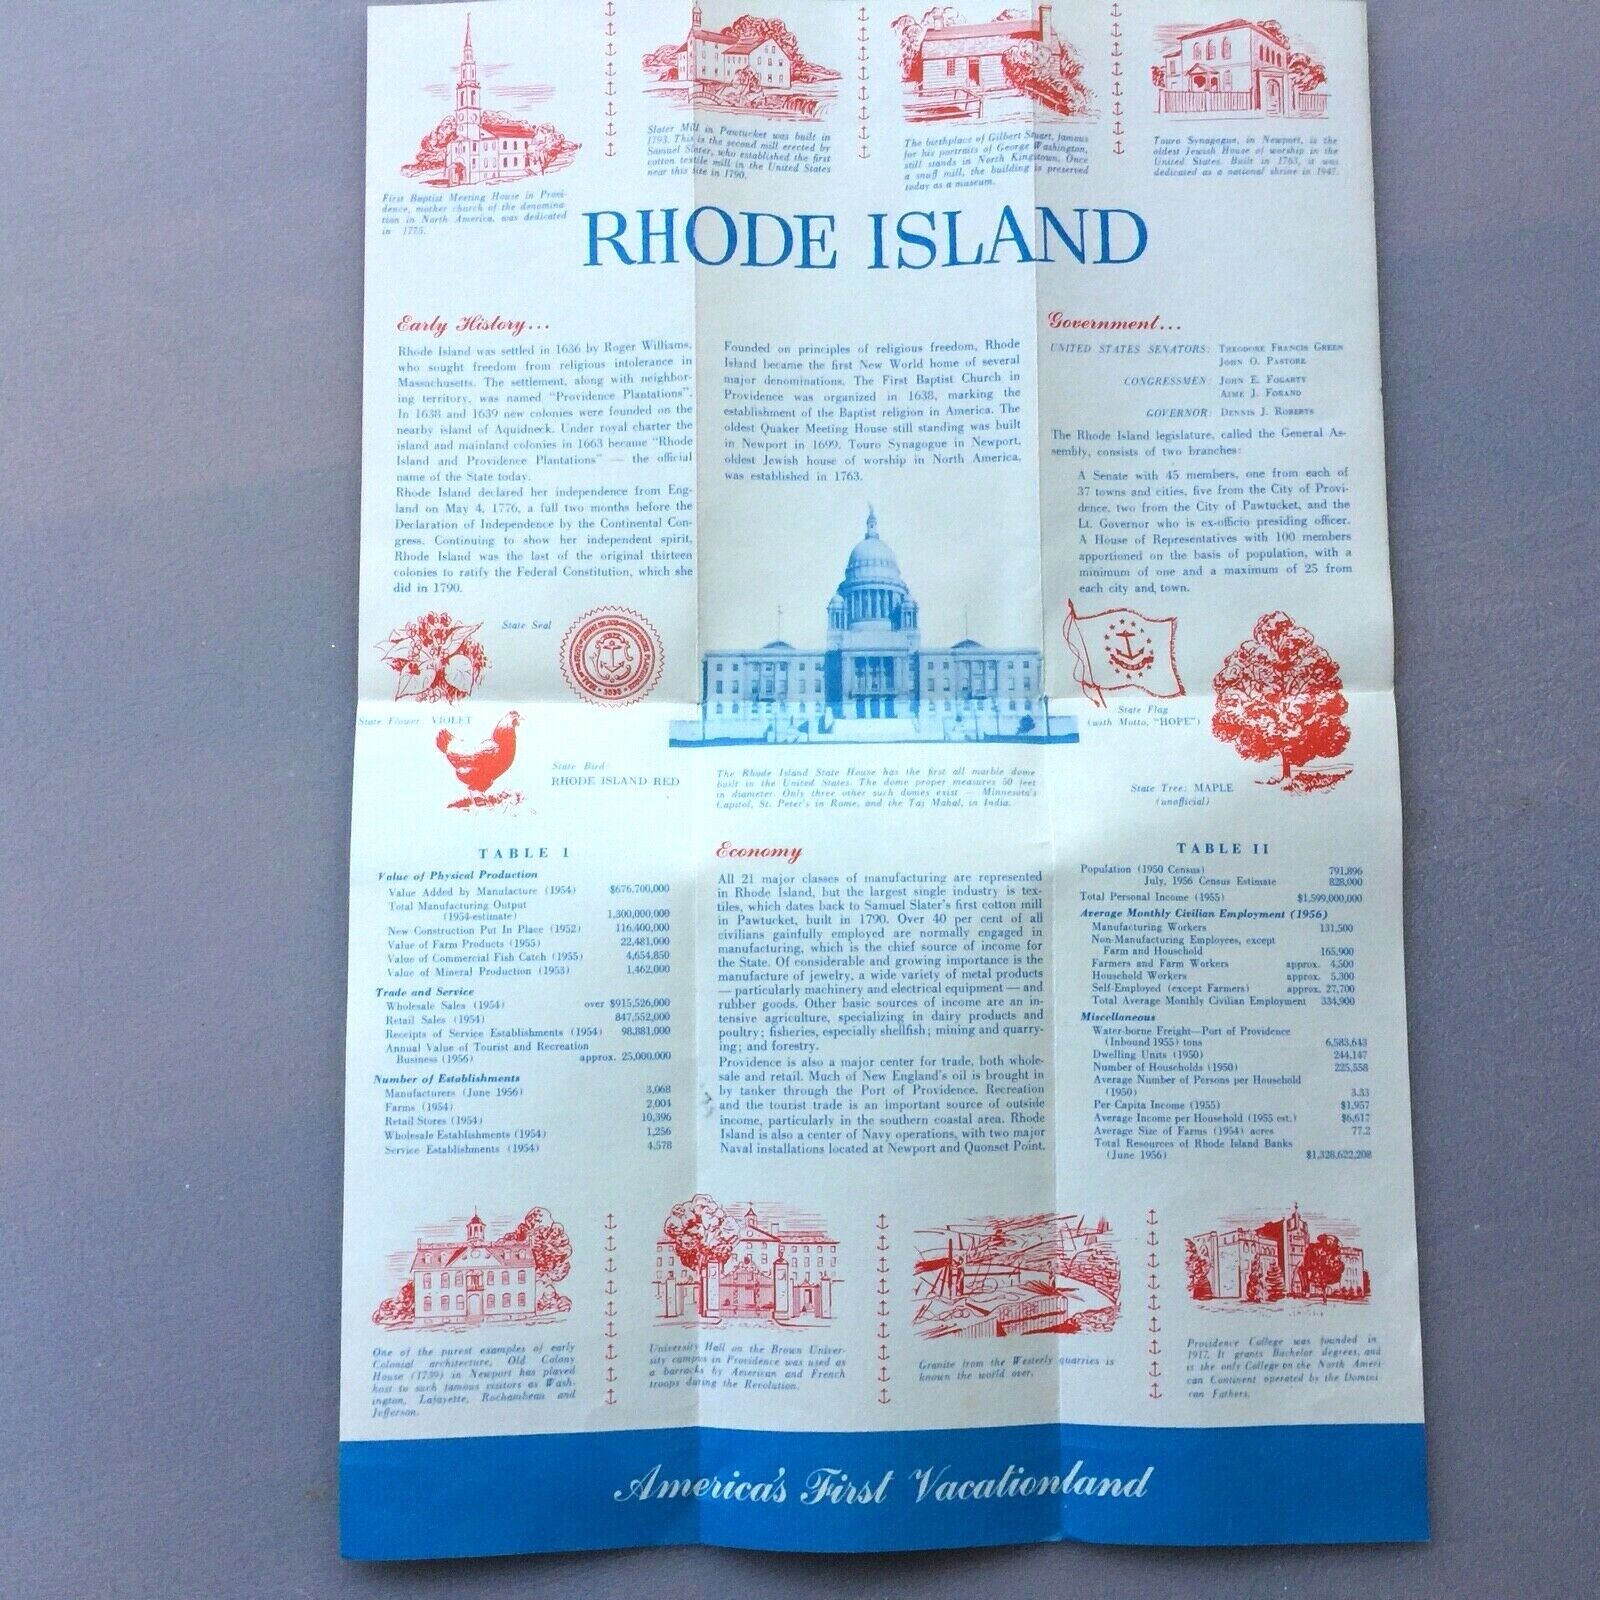 1956 NEW HAMPSHIRE vintage travel brochure AMERICA'S FIRST VACATIONLAND + Facts